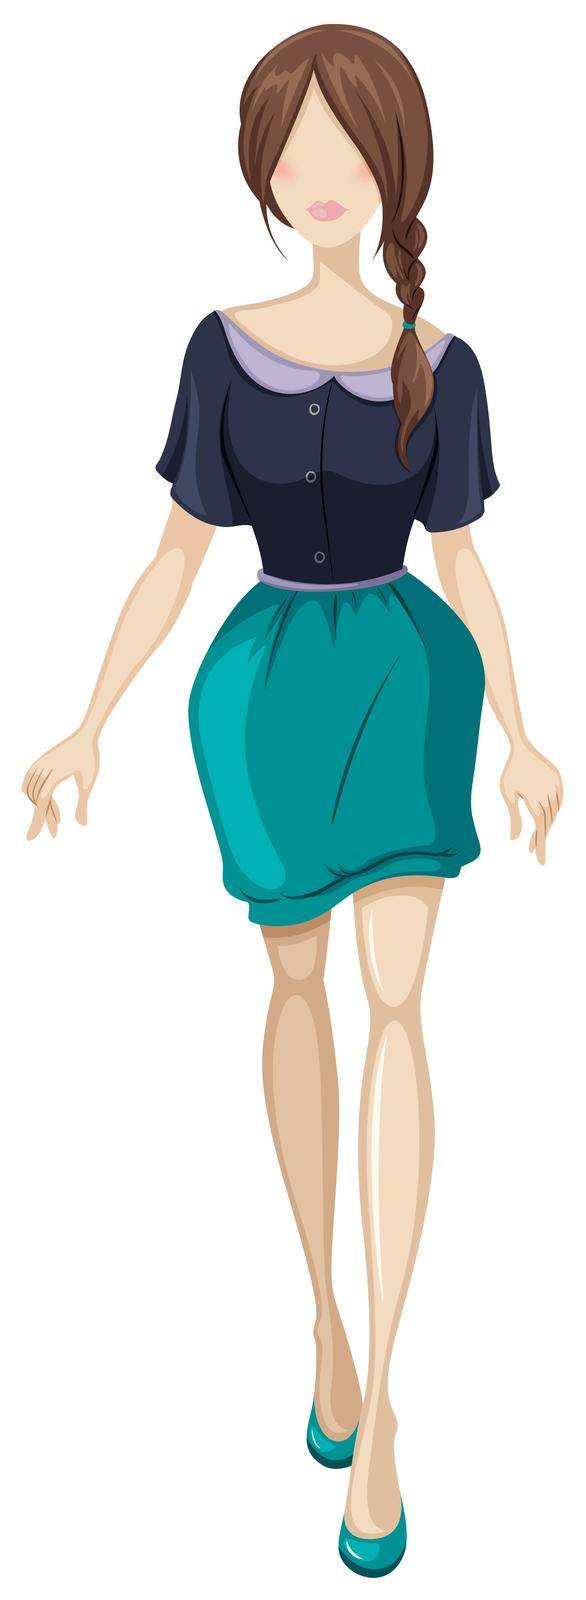 Sketch of a woman in dark blue top and aqua blue skirt